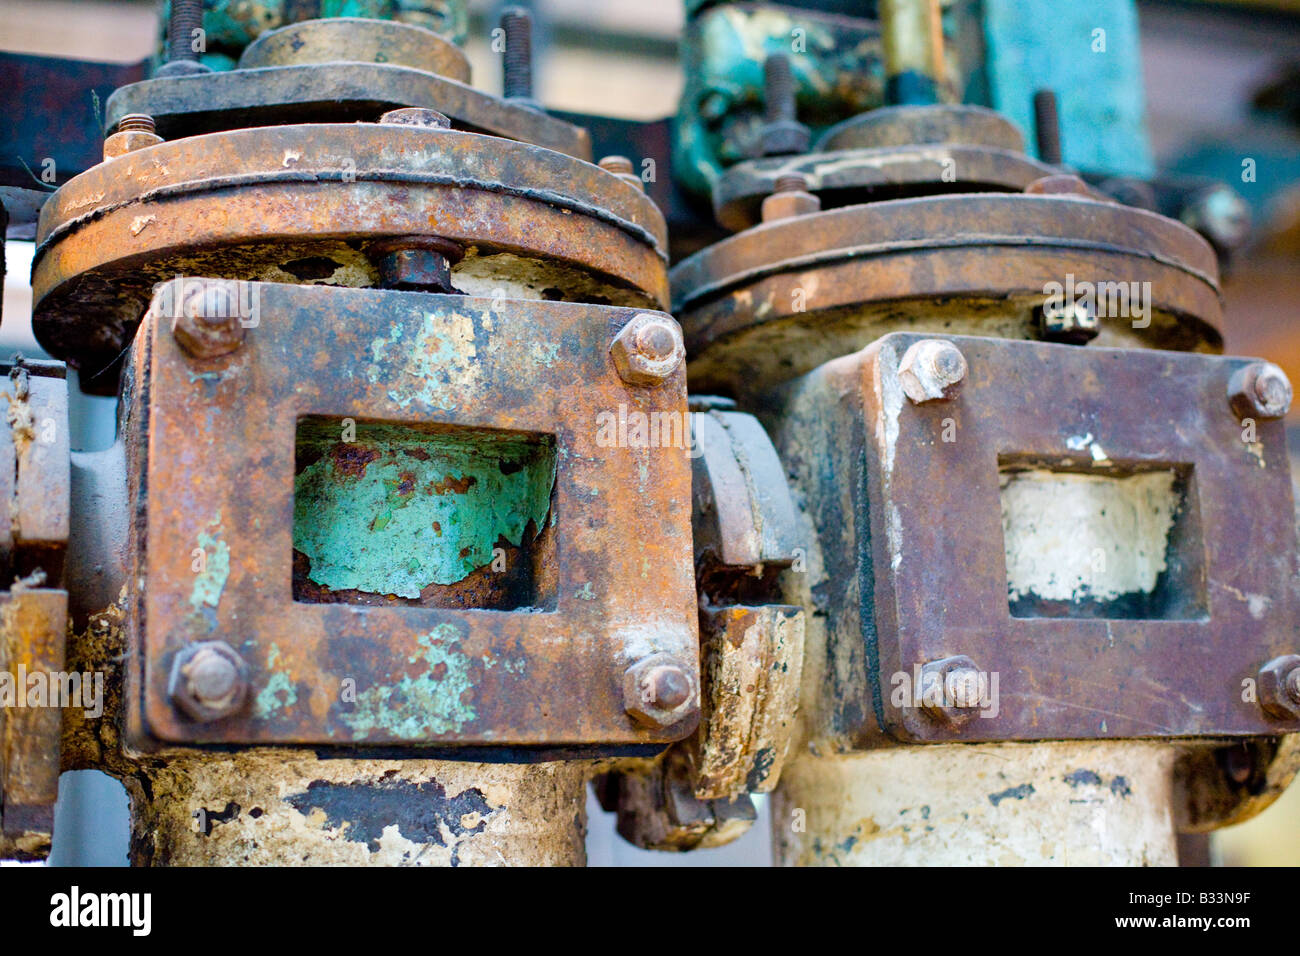 rusting disused machinery in an industrial setting Stock Photo